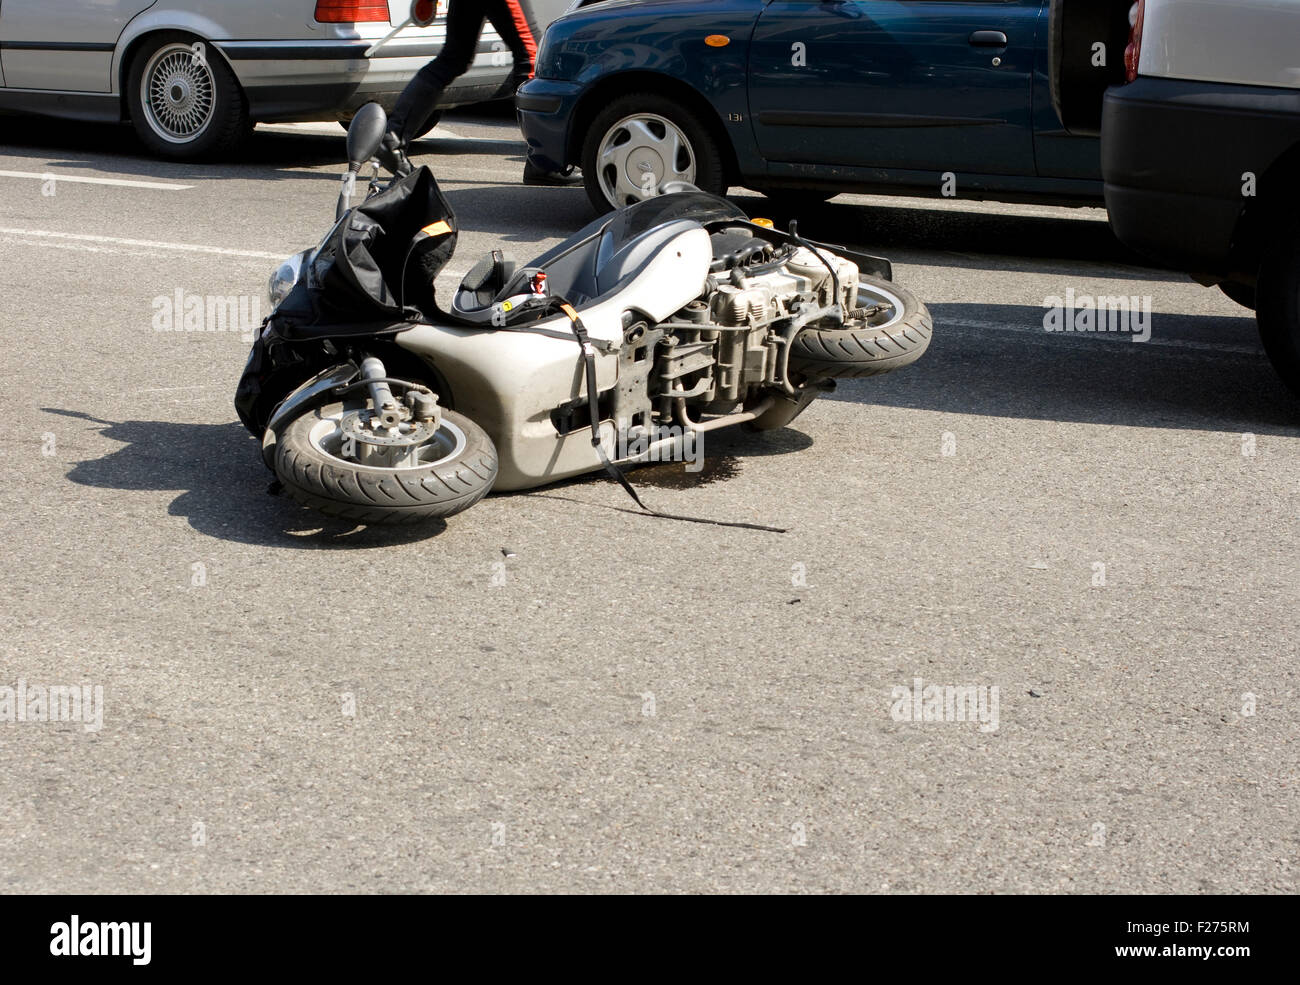 Scooter crash in the urban street Stock Photo - Alamy